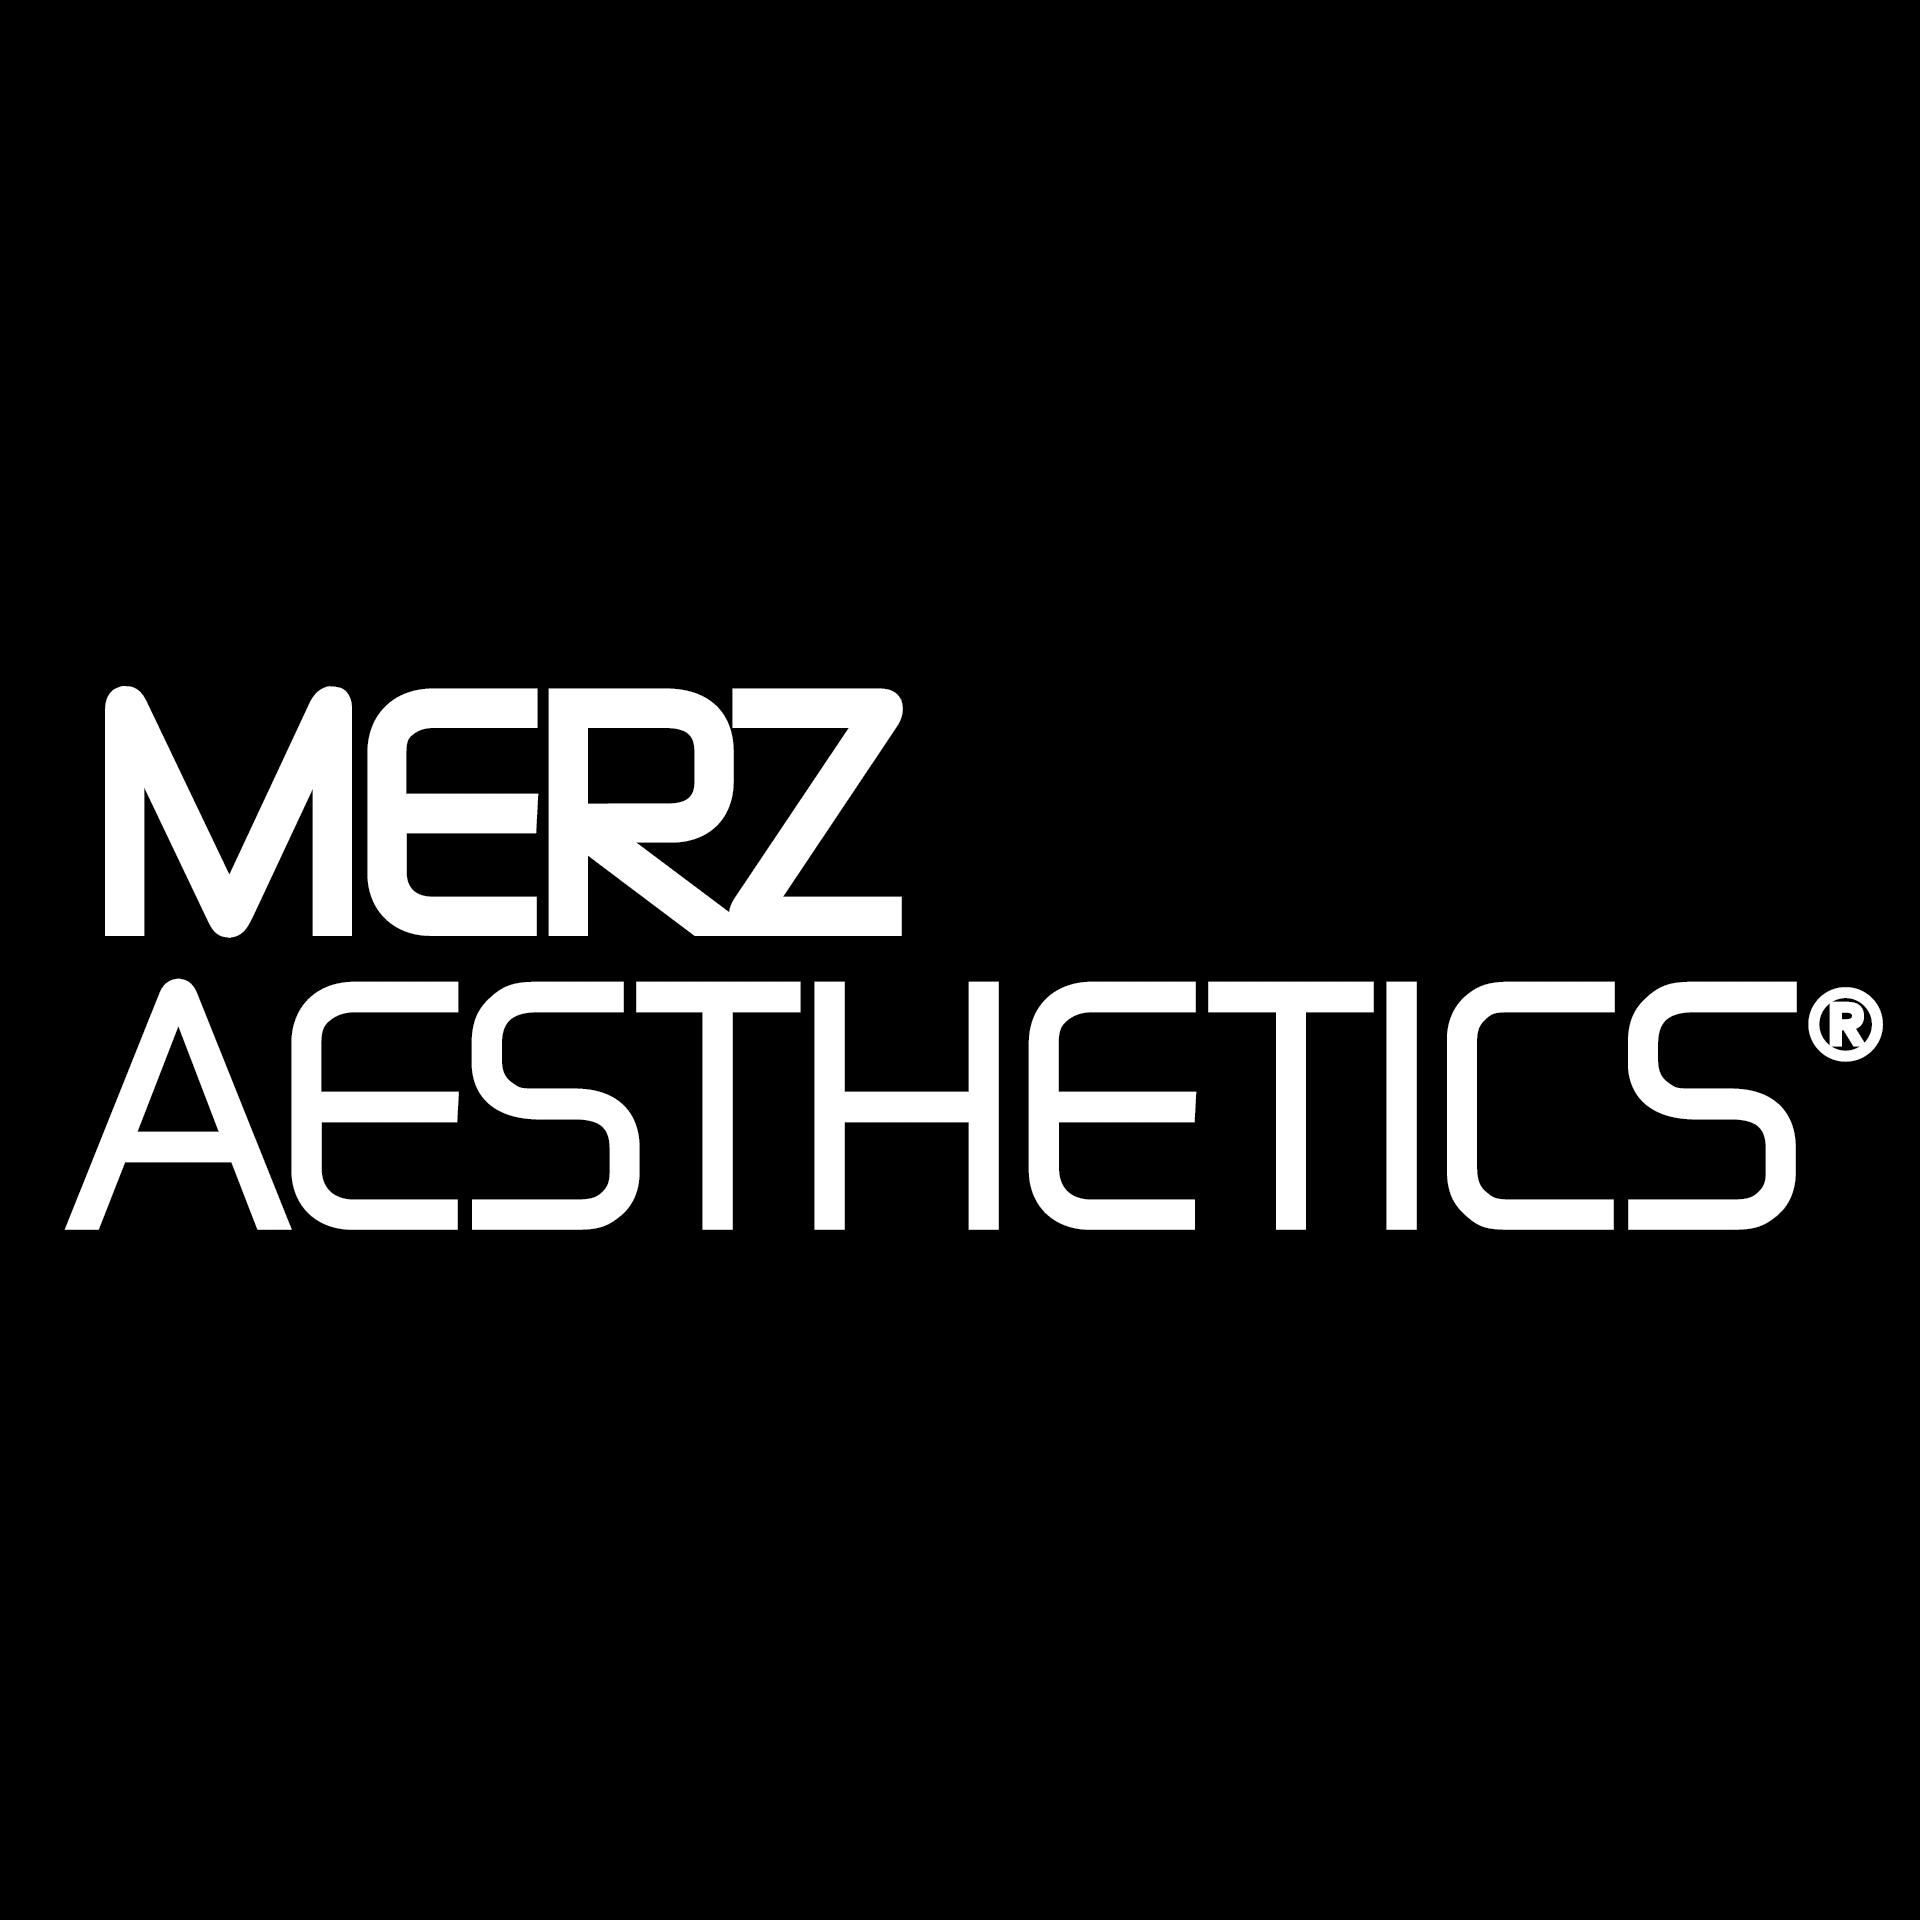 Merz Aesthtics continues to fiel | theaestheticguide.com